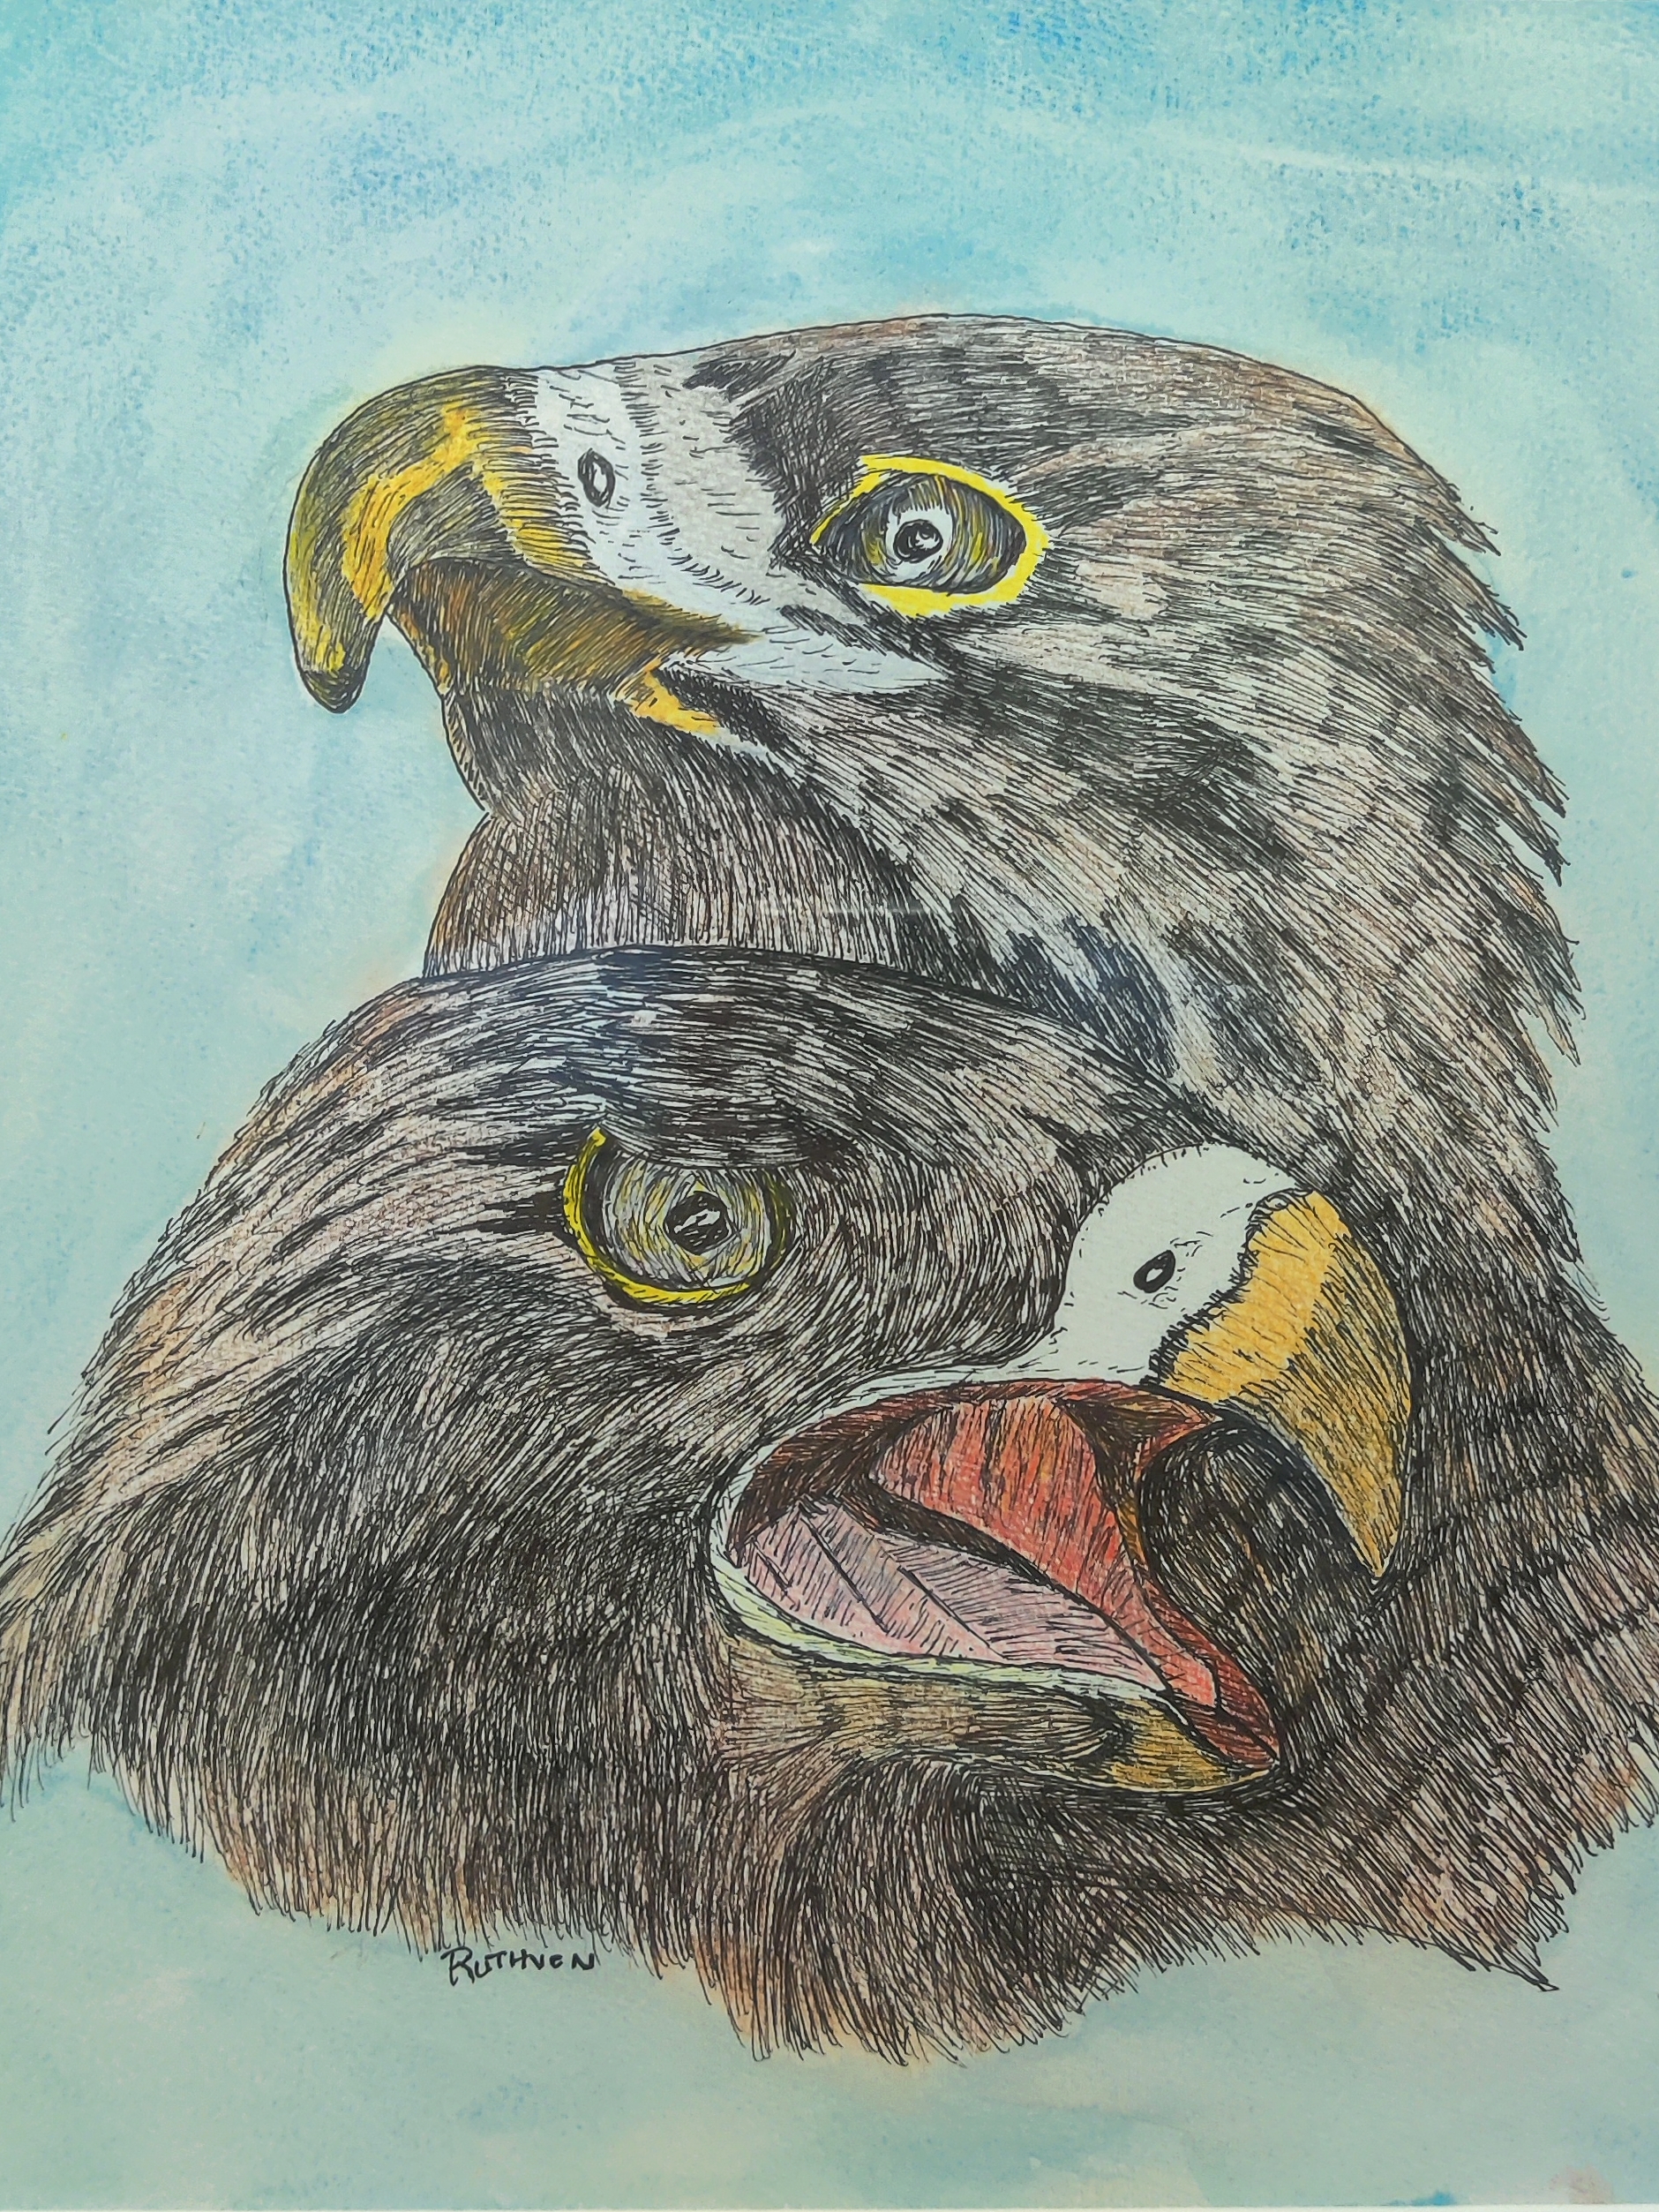 Eagle drawing by veteran artist Tom Ruthven